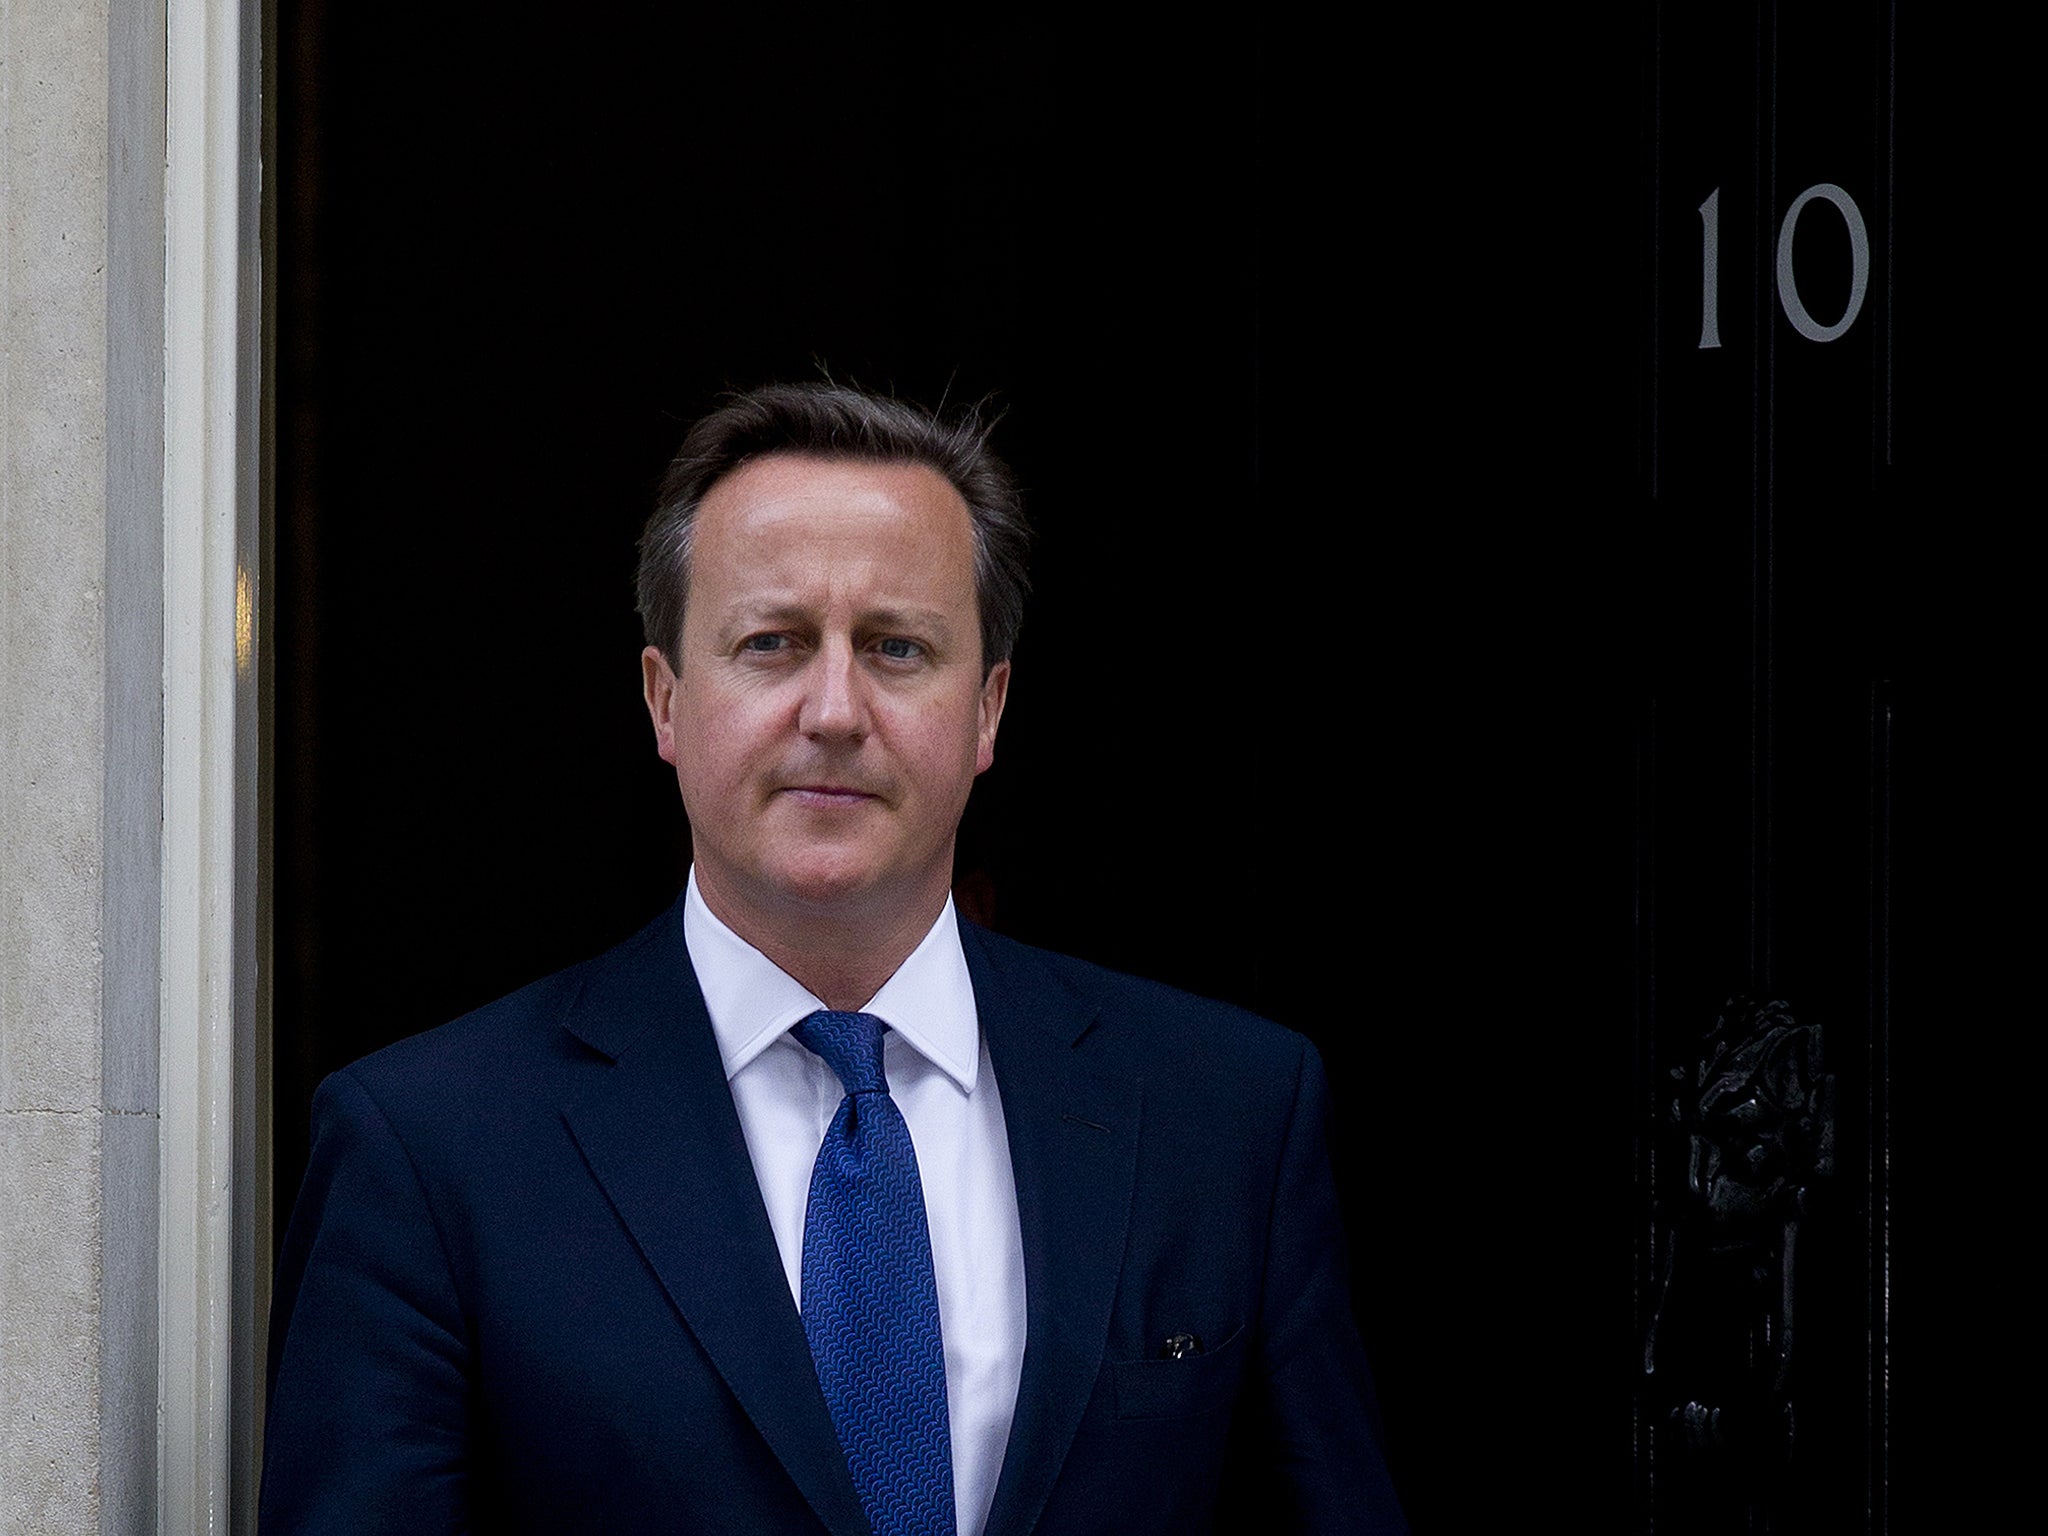 Claims Prime Minister David Cameron has failed to curb welfare spending